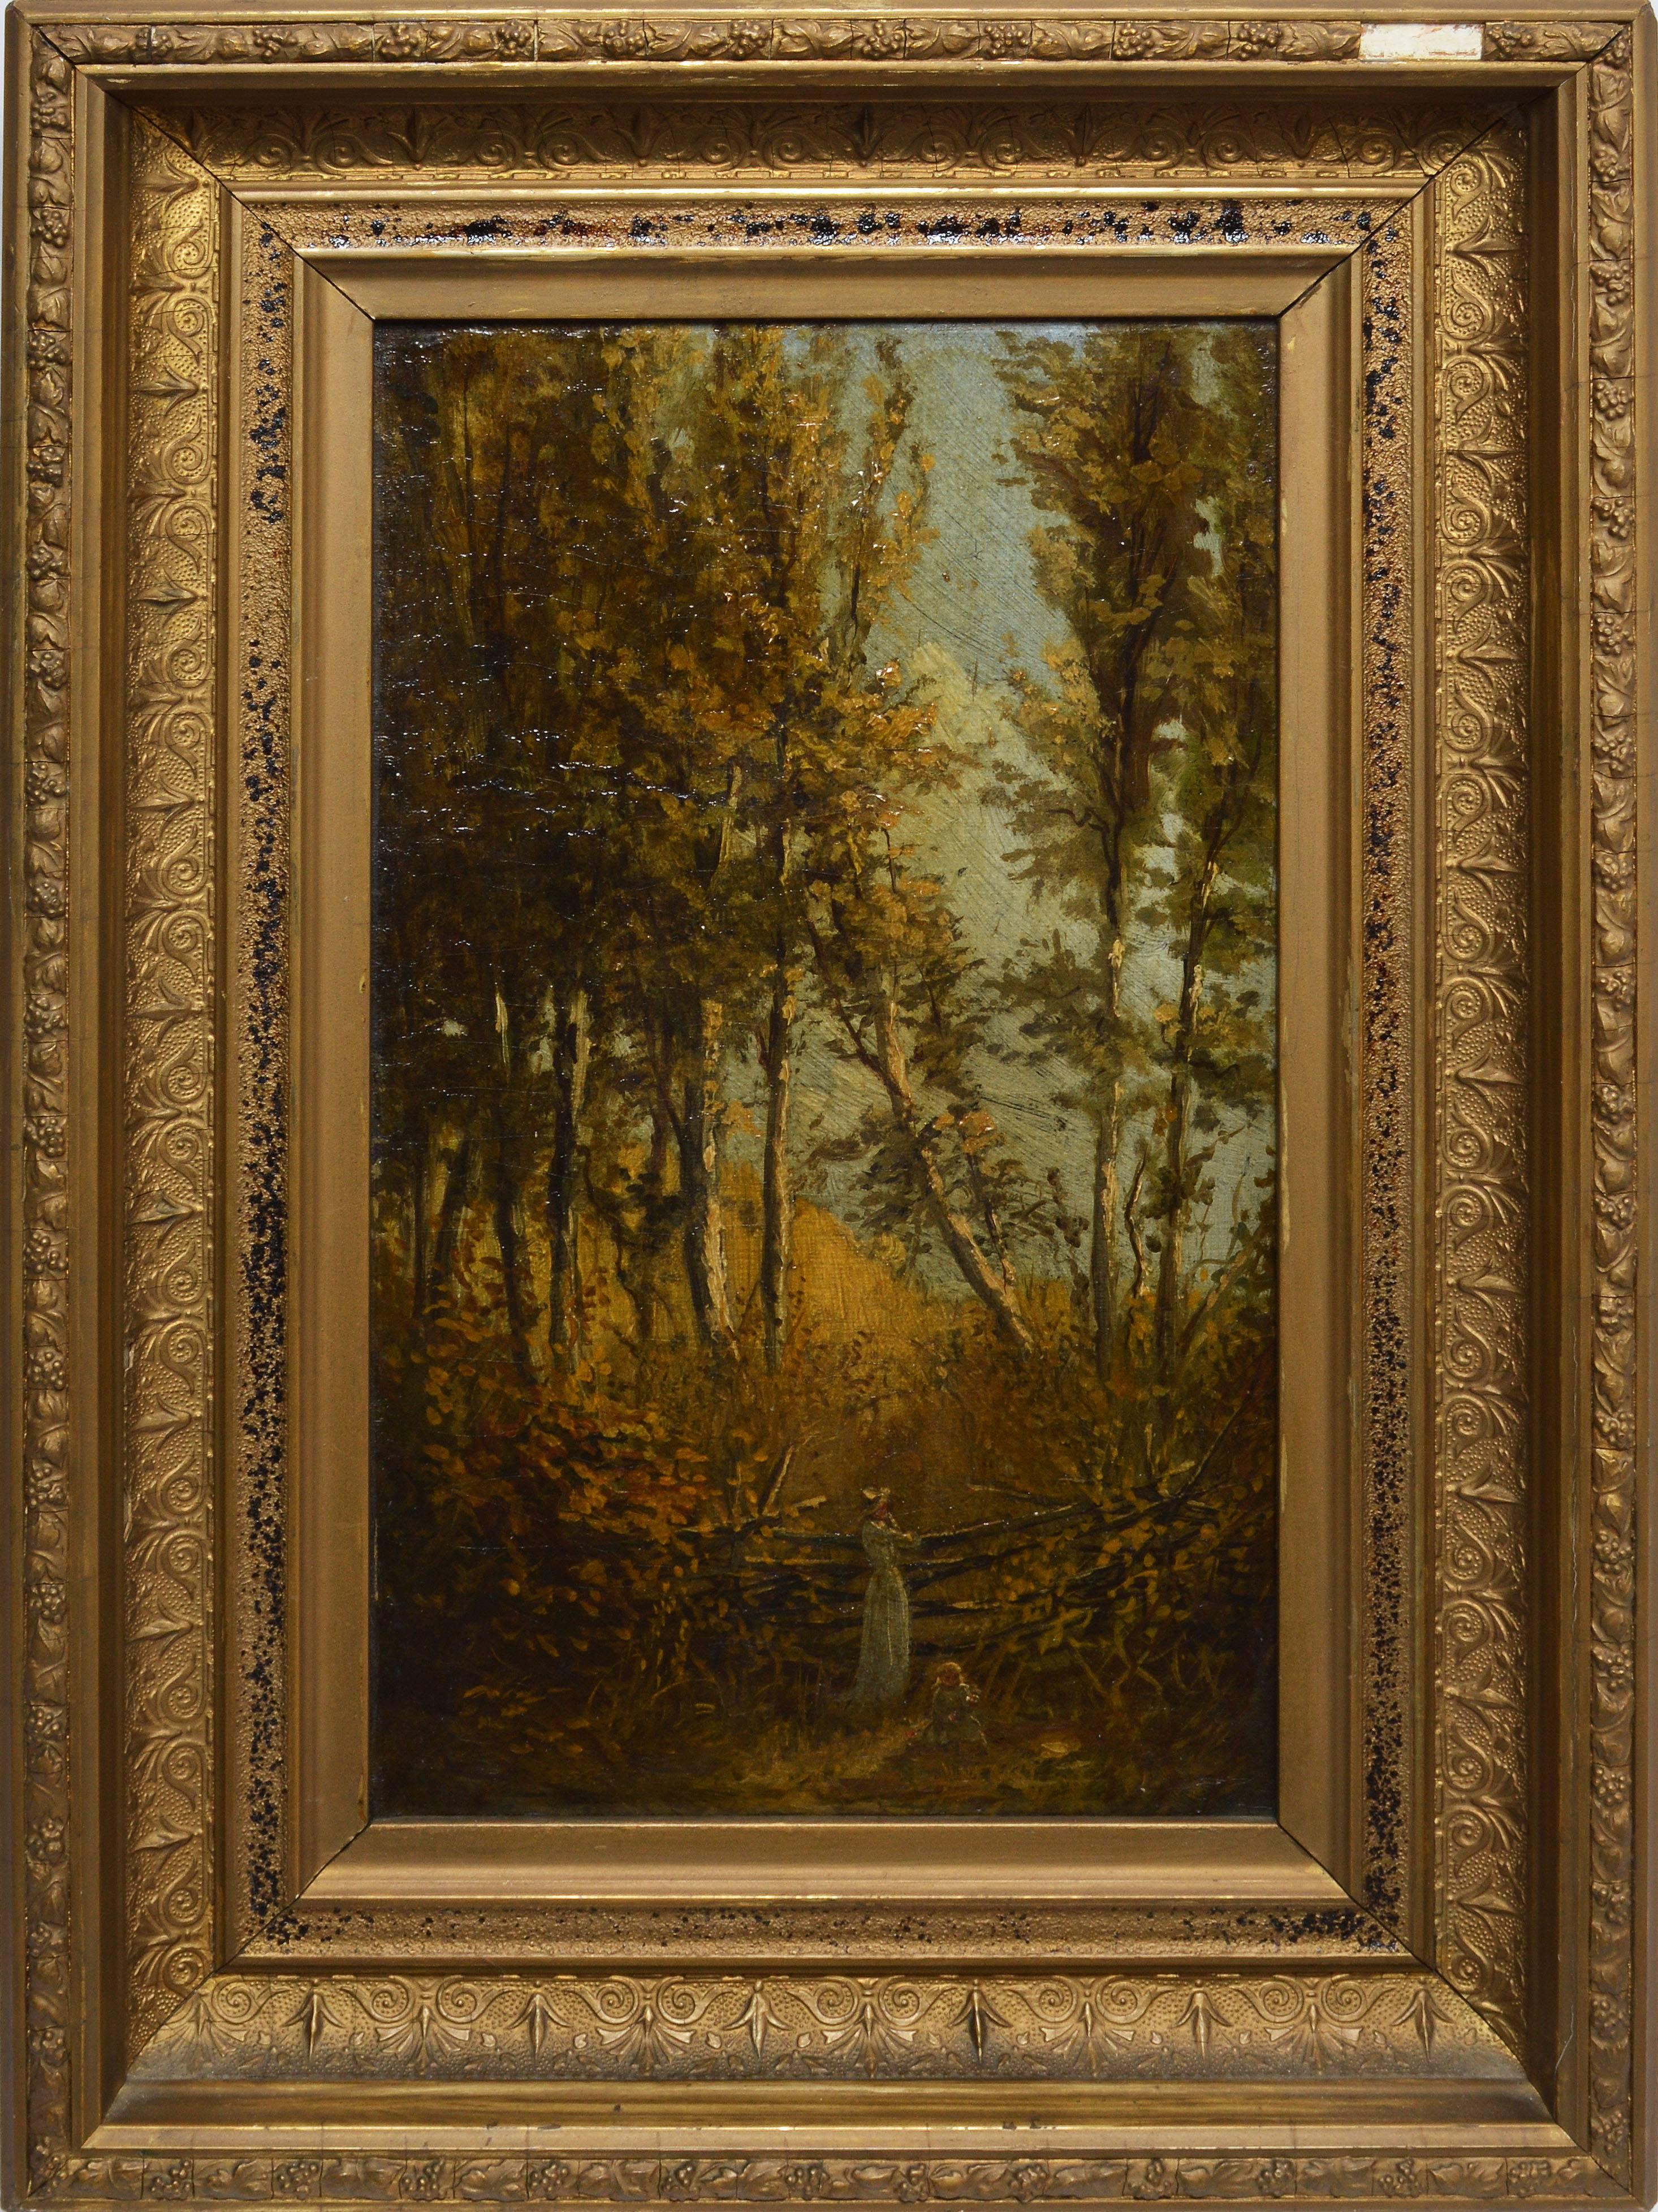 Unknown Landscape Painting - Early American Landscape with Figures